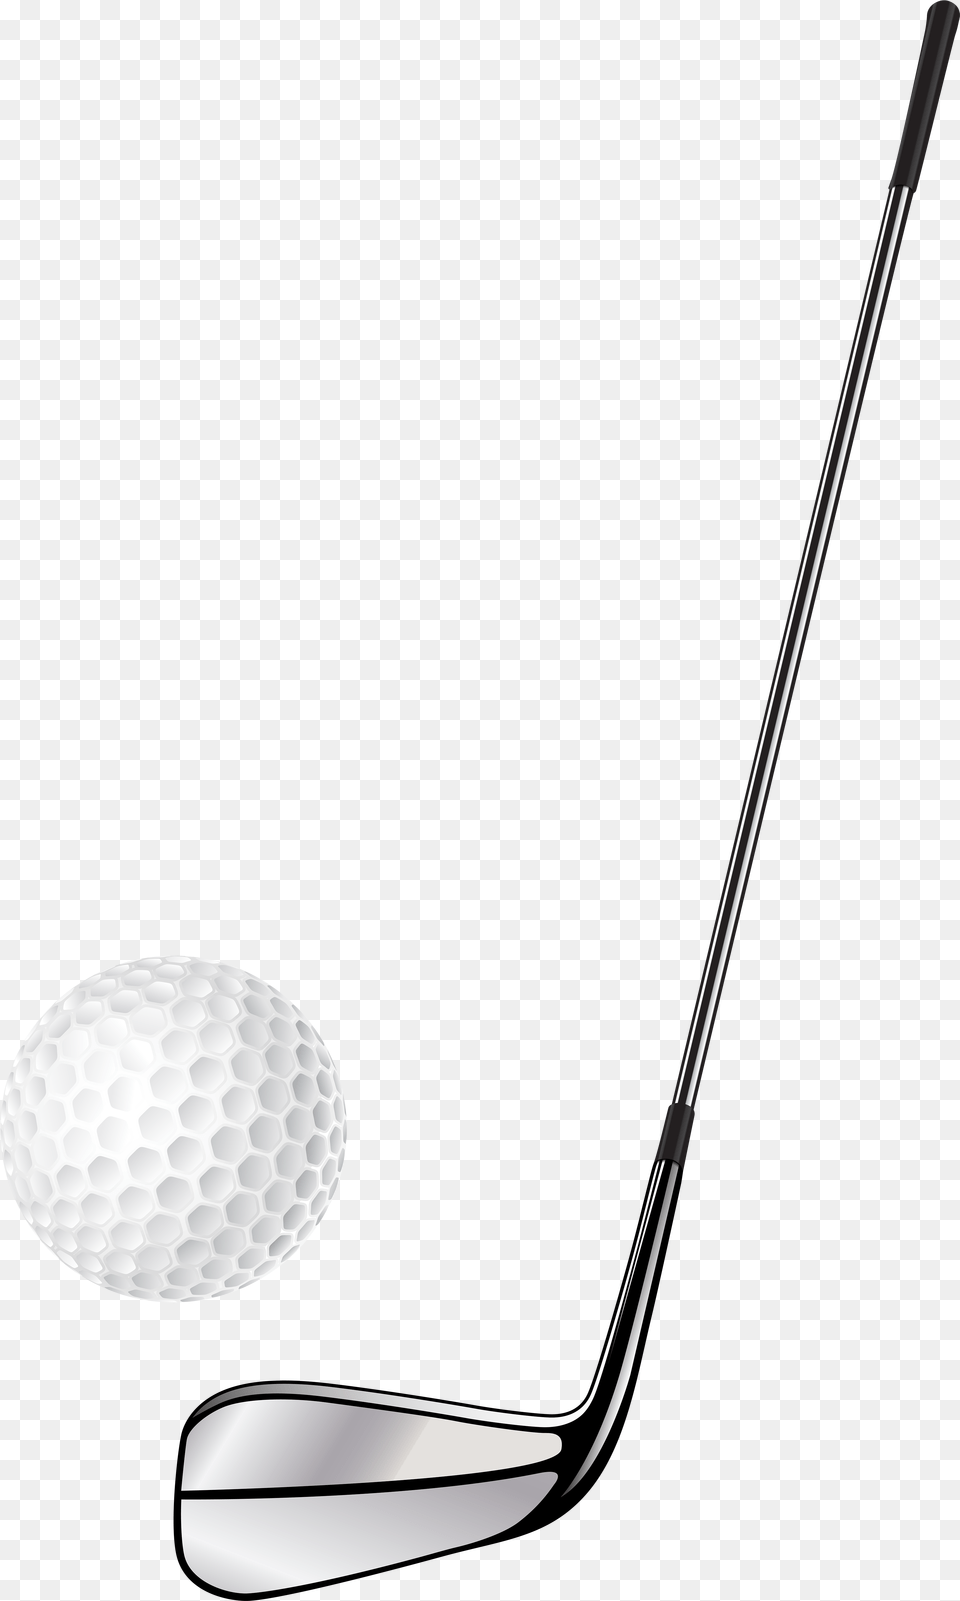 Club Vector Library Download Files Golf Club And Ball, Golf Club, Sport, Putter Png